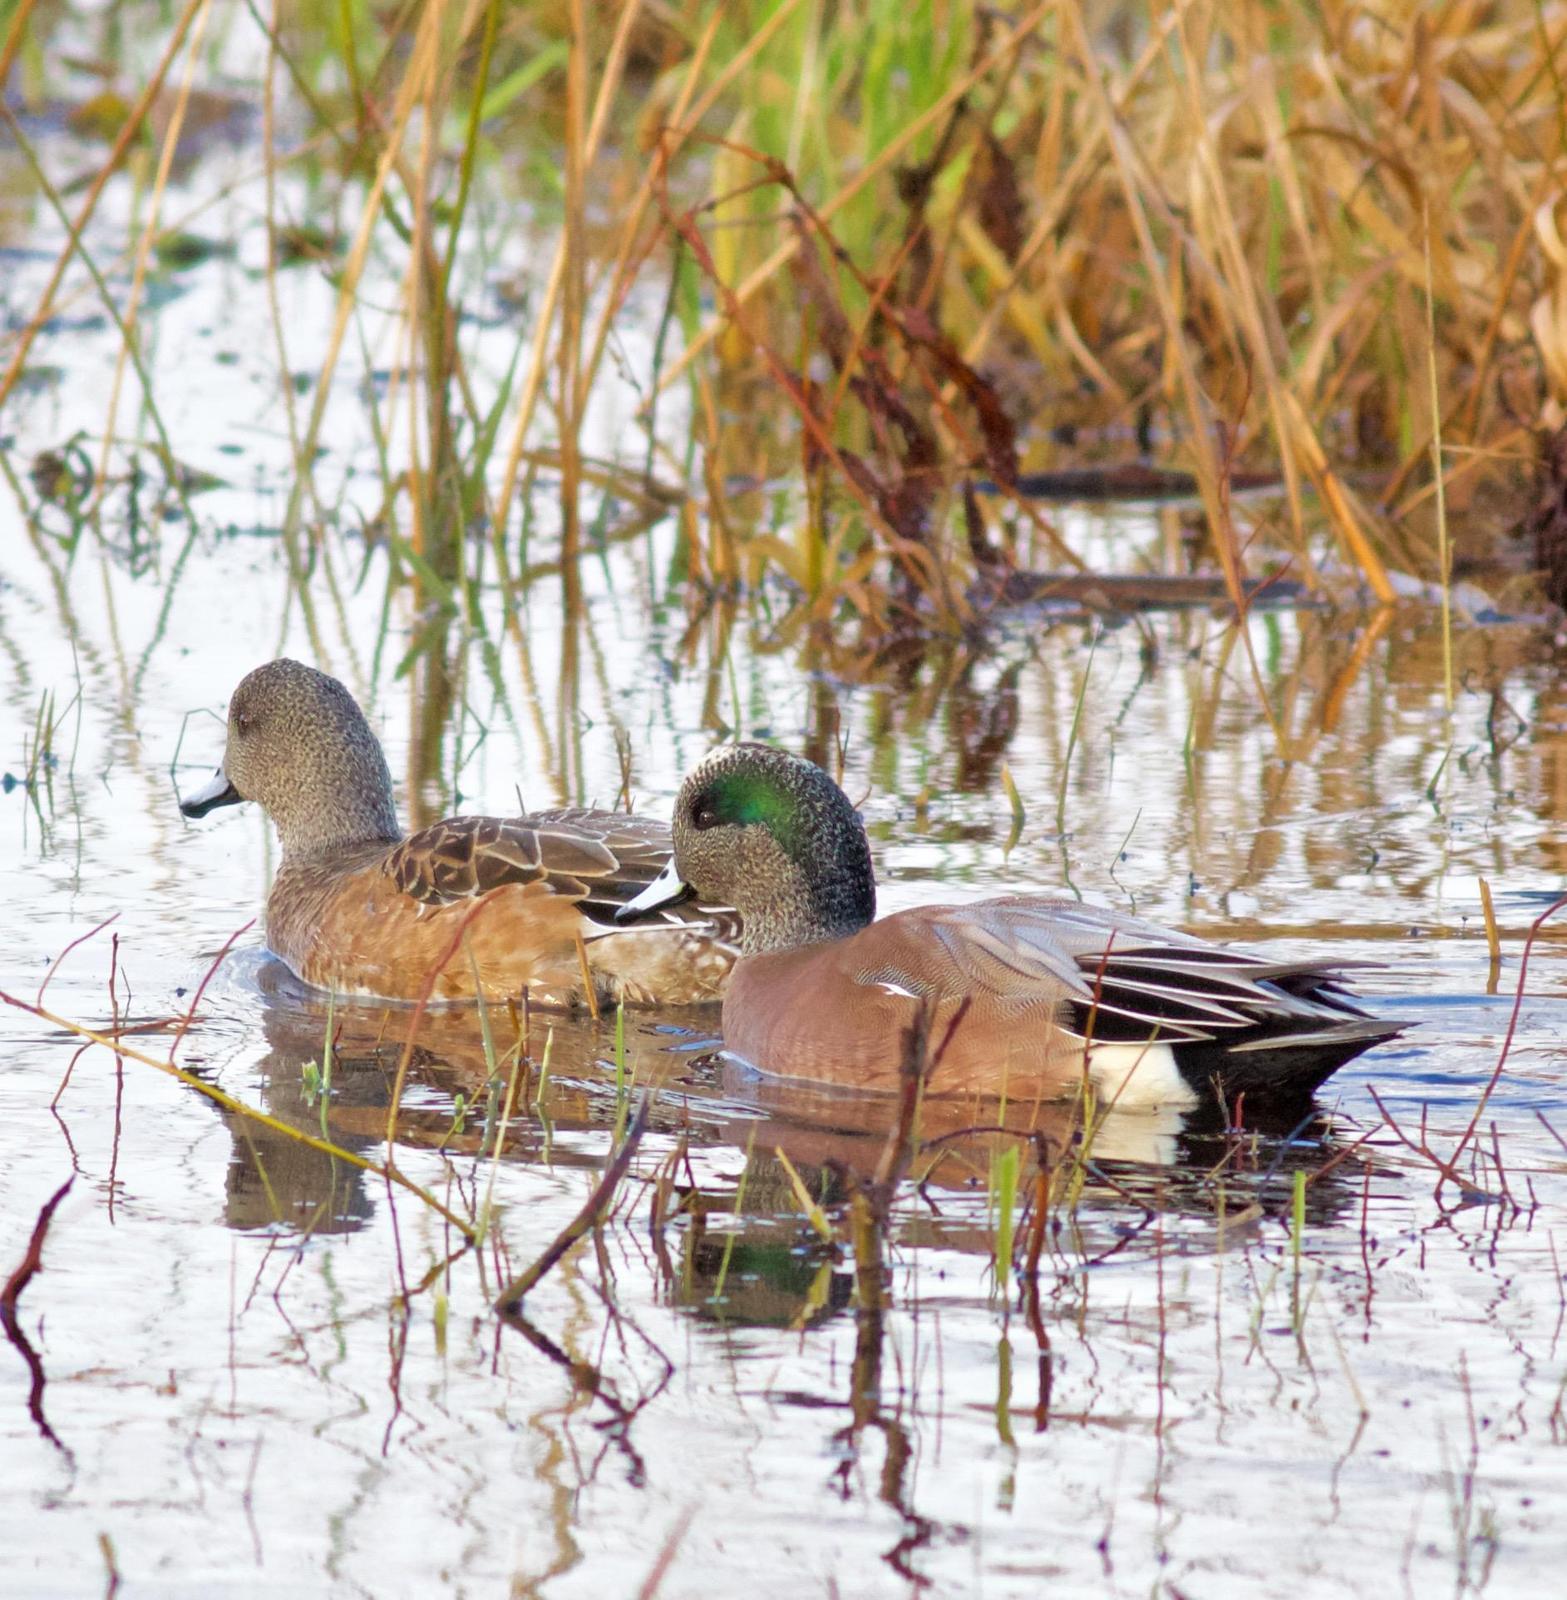 American Wigeon Photo by Kathryn Keith